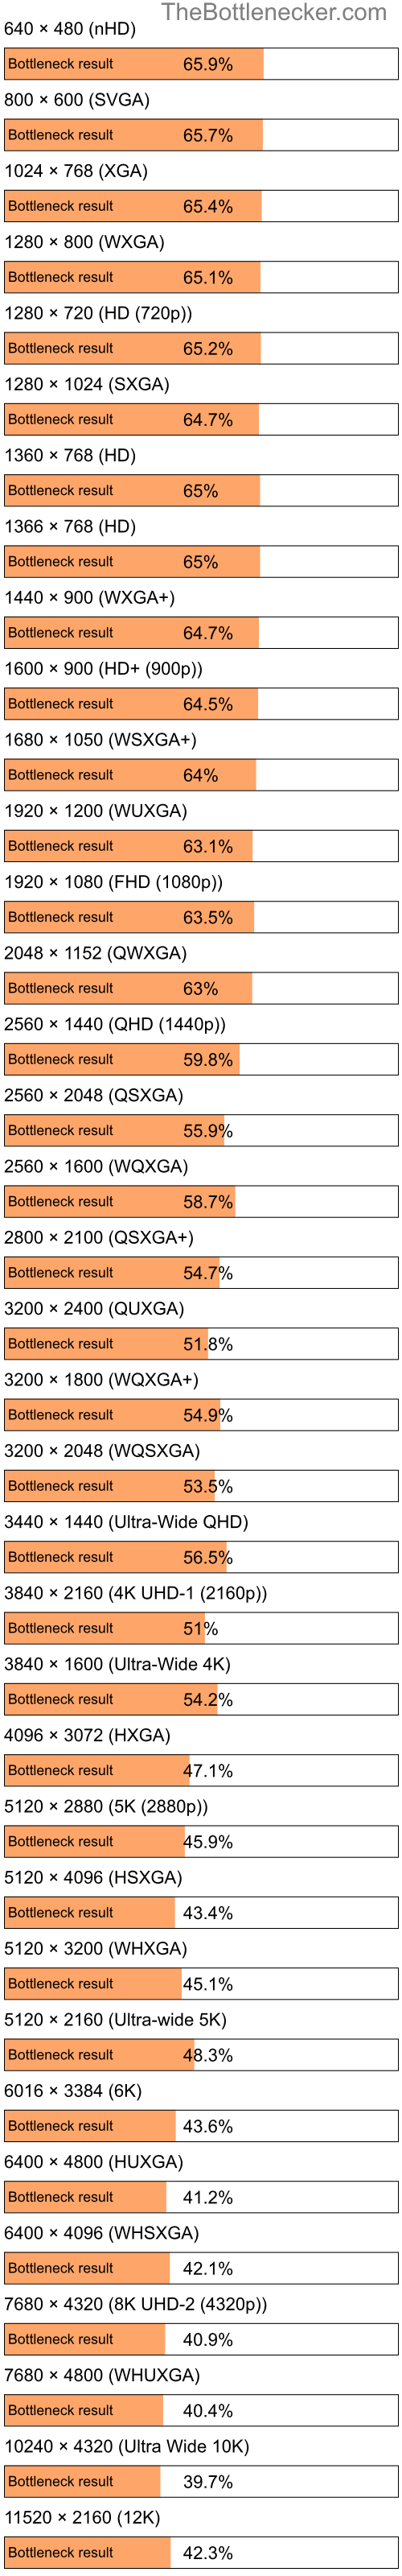 Bottleneck results by resolution for Intel Core2 Duo E7400 and NVIDIA GeForce GTX 1660 SUPER in Graphic Card Intense Tasks